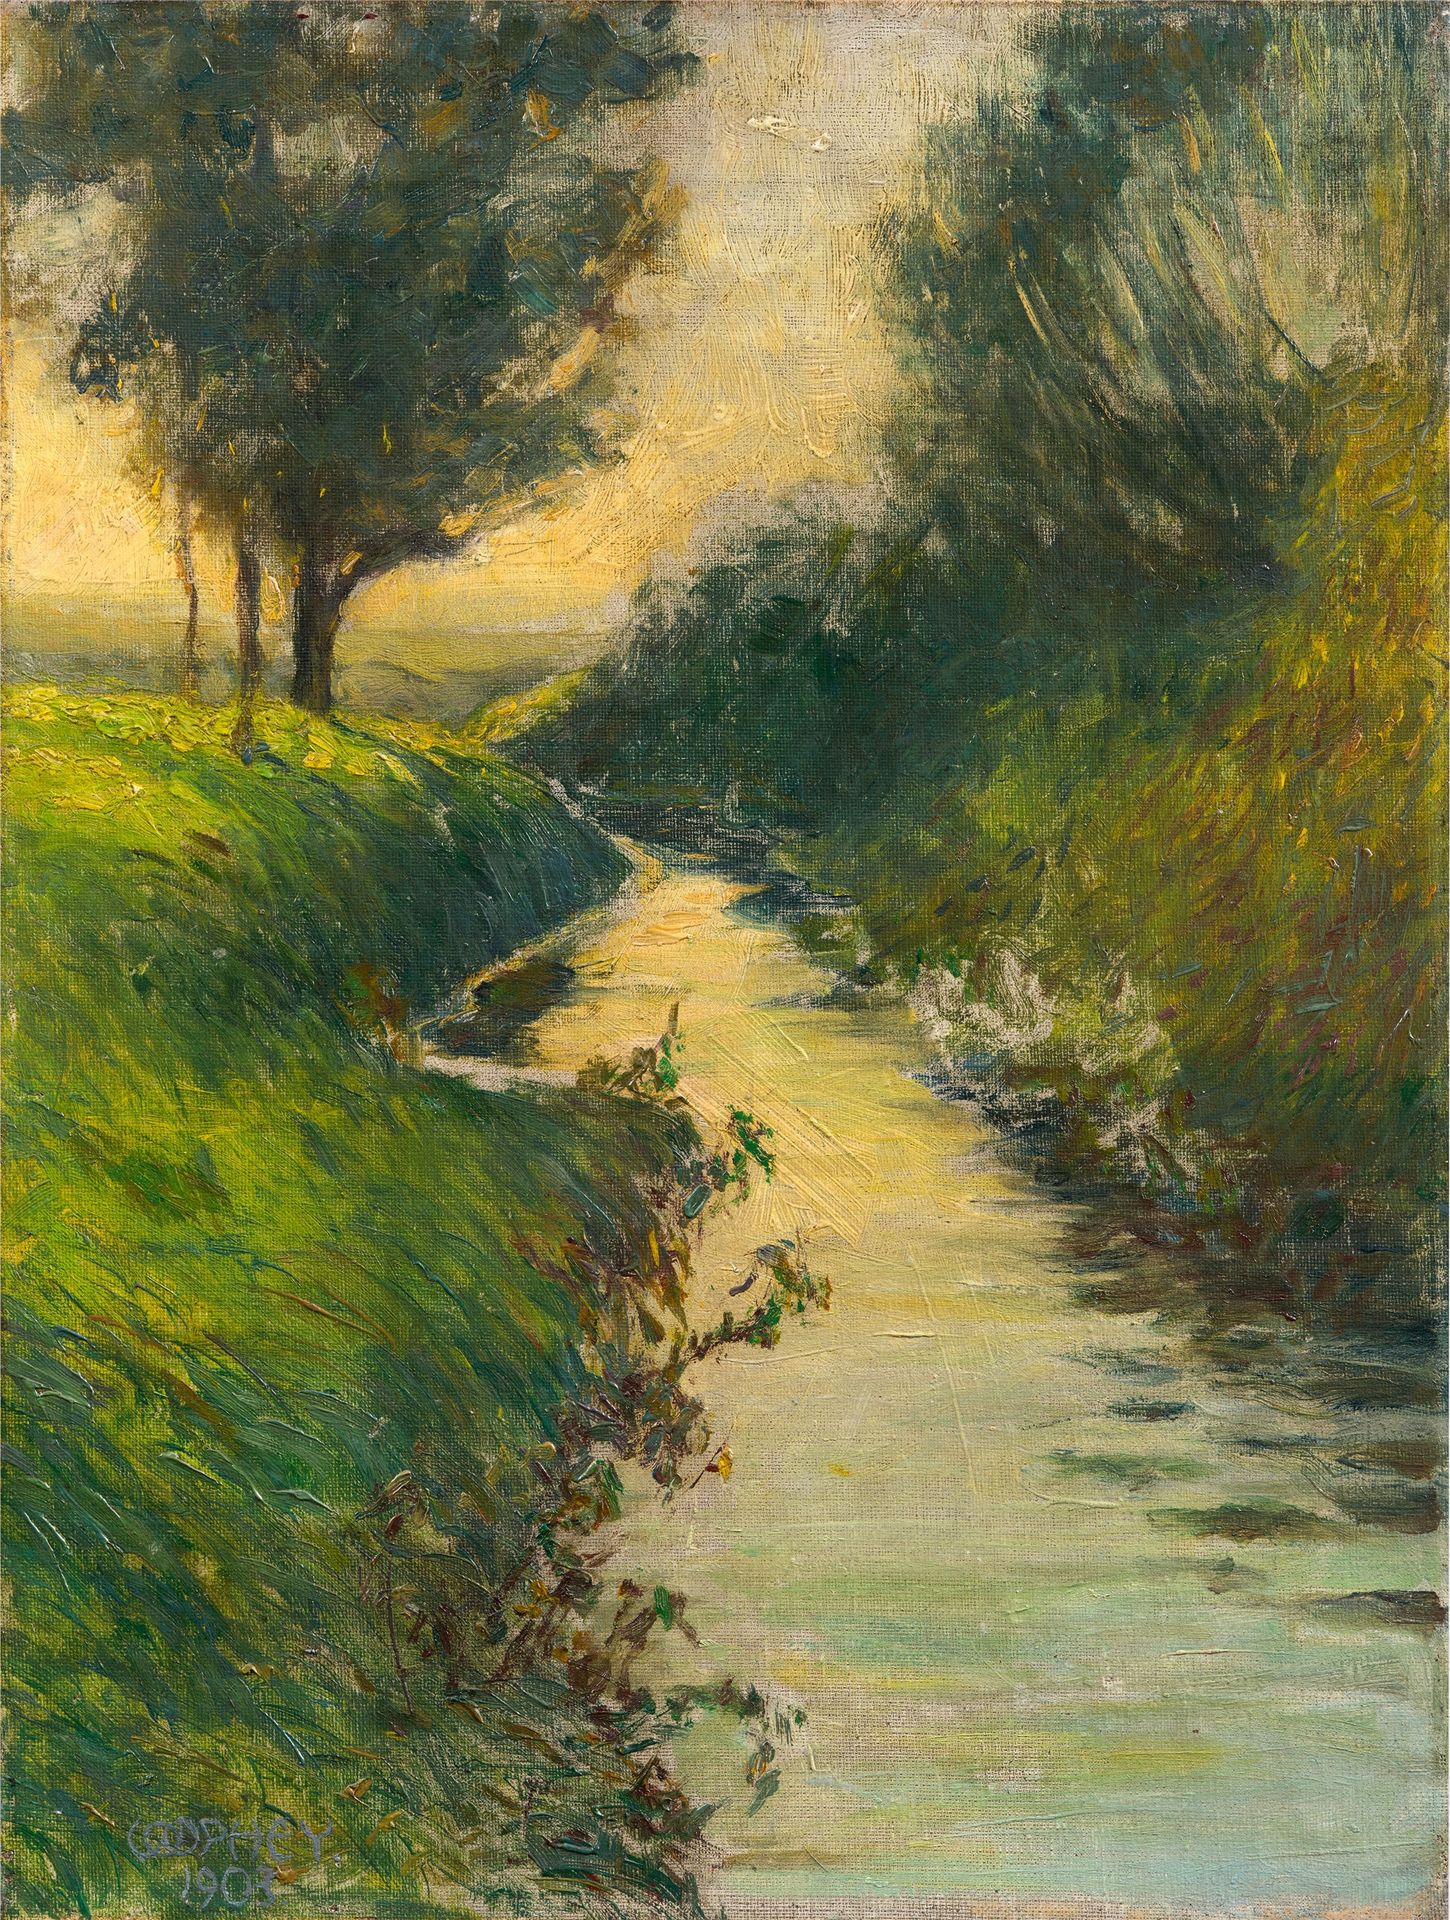 Walter Ophey Walter Ophey







Cours d'eau au soir



1903







Huile sur to&hellip;